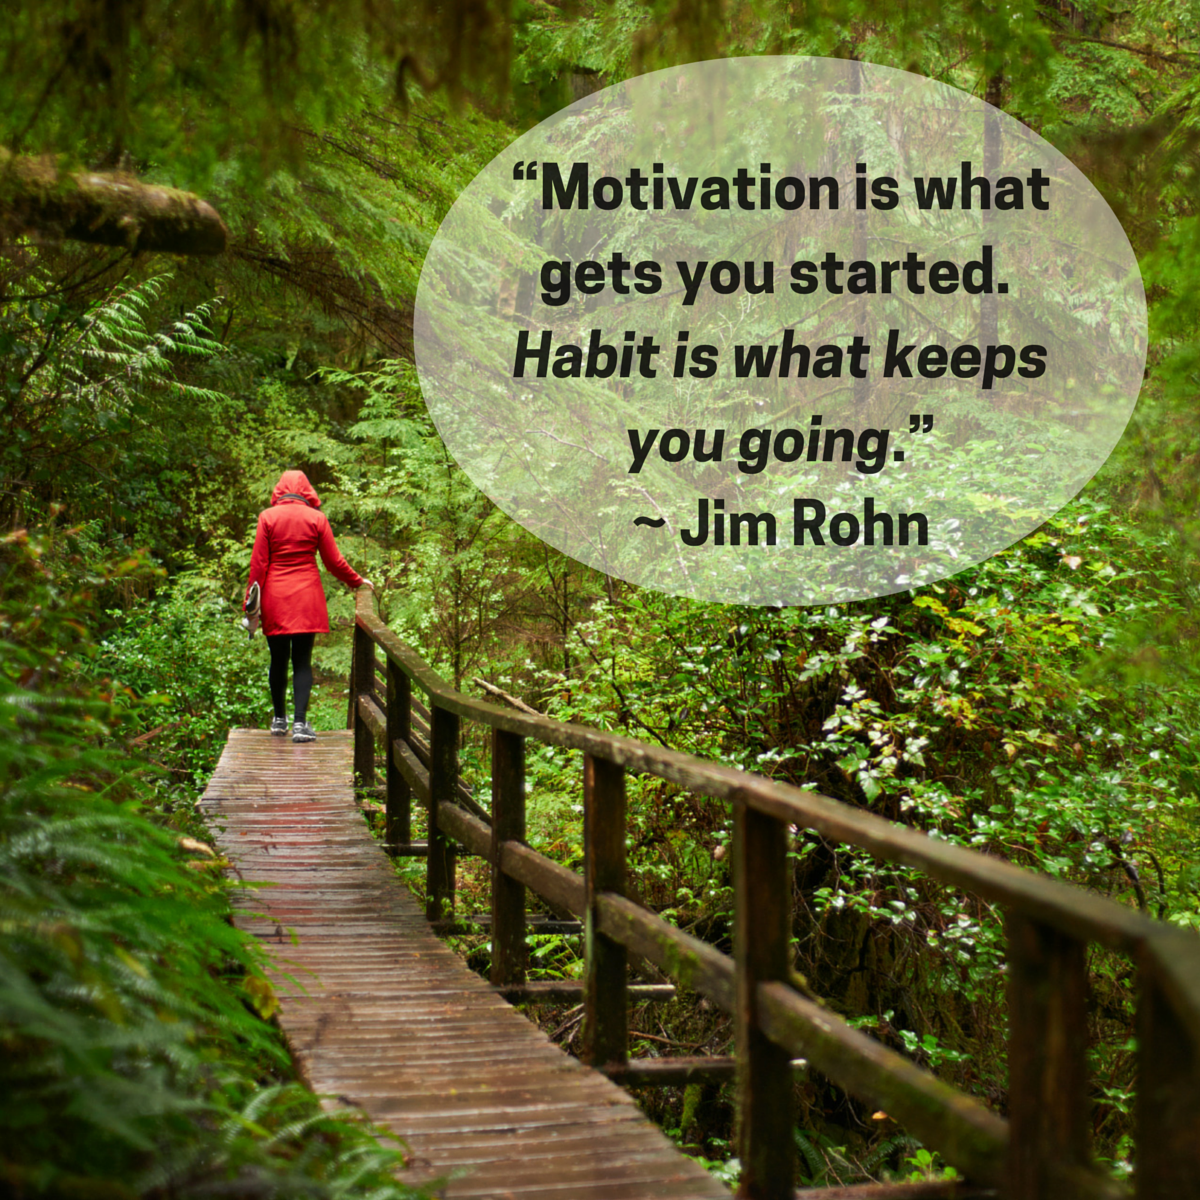 “Motivation is what gets you started.